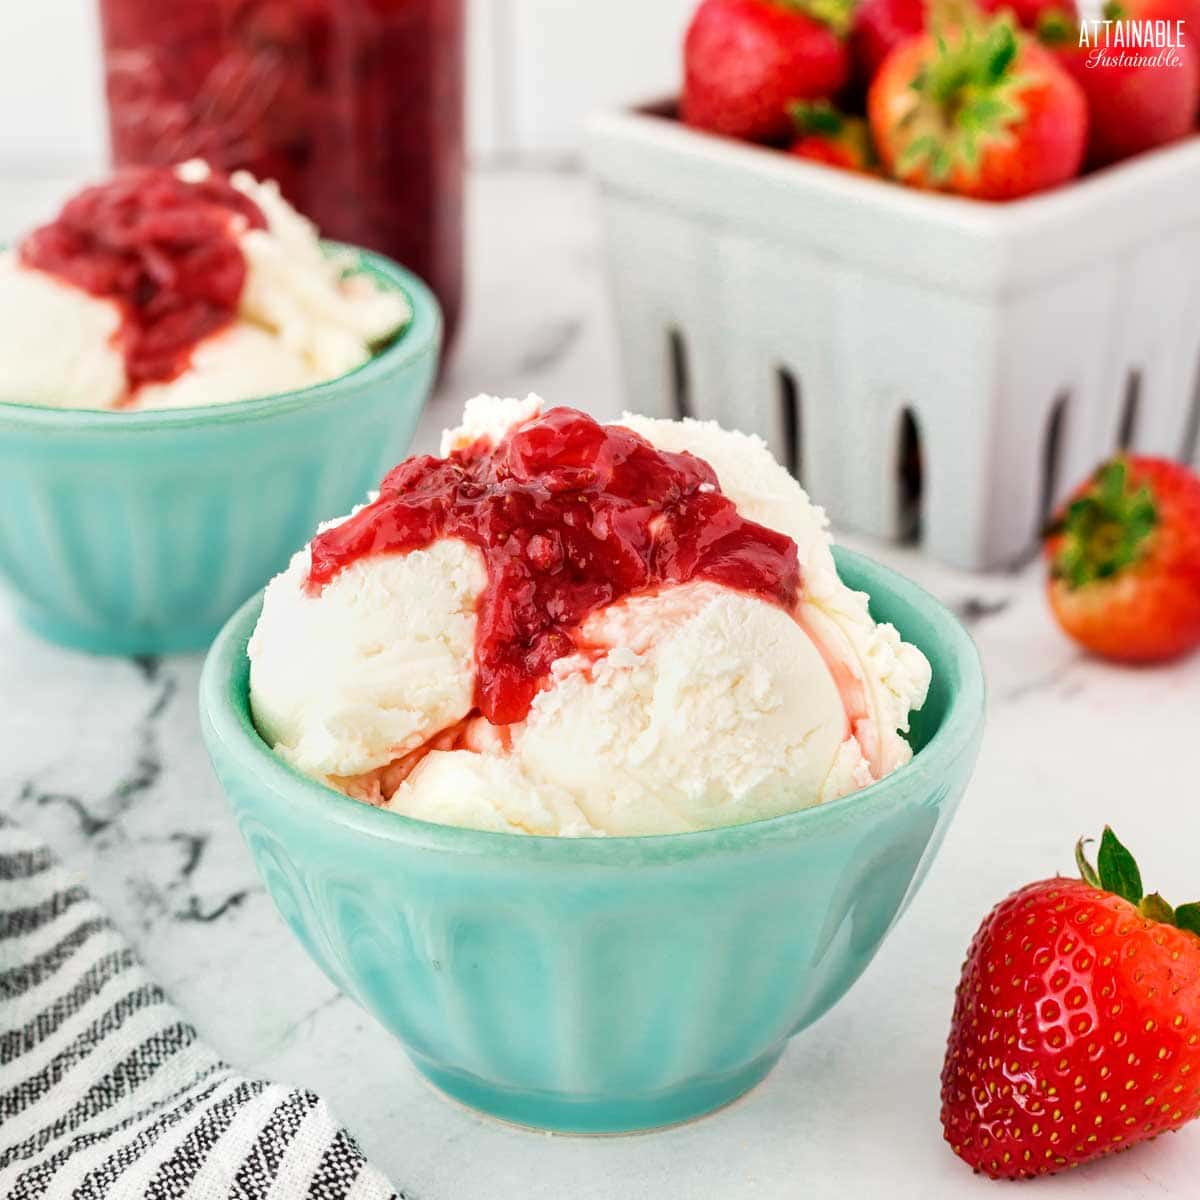 ice cream topped with berry sauce.